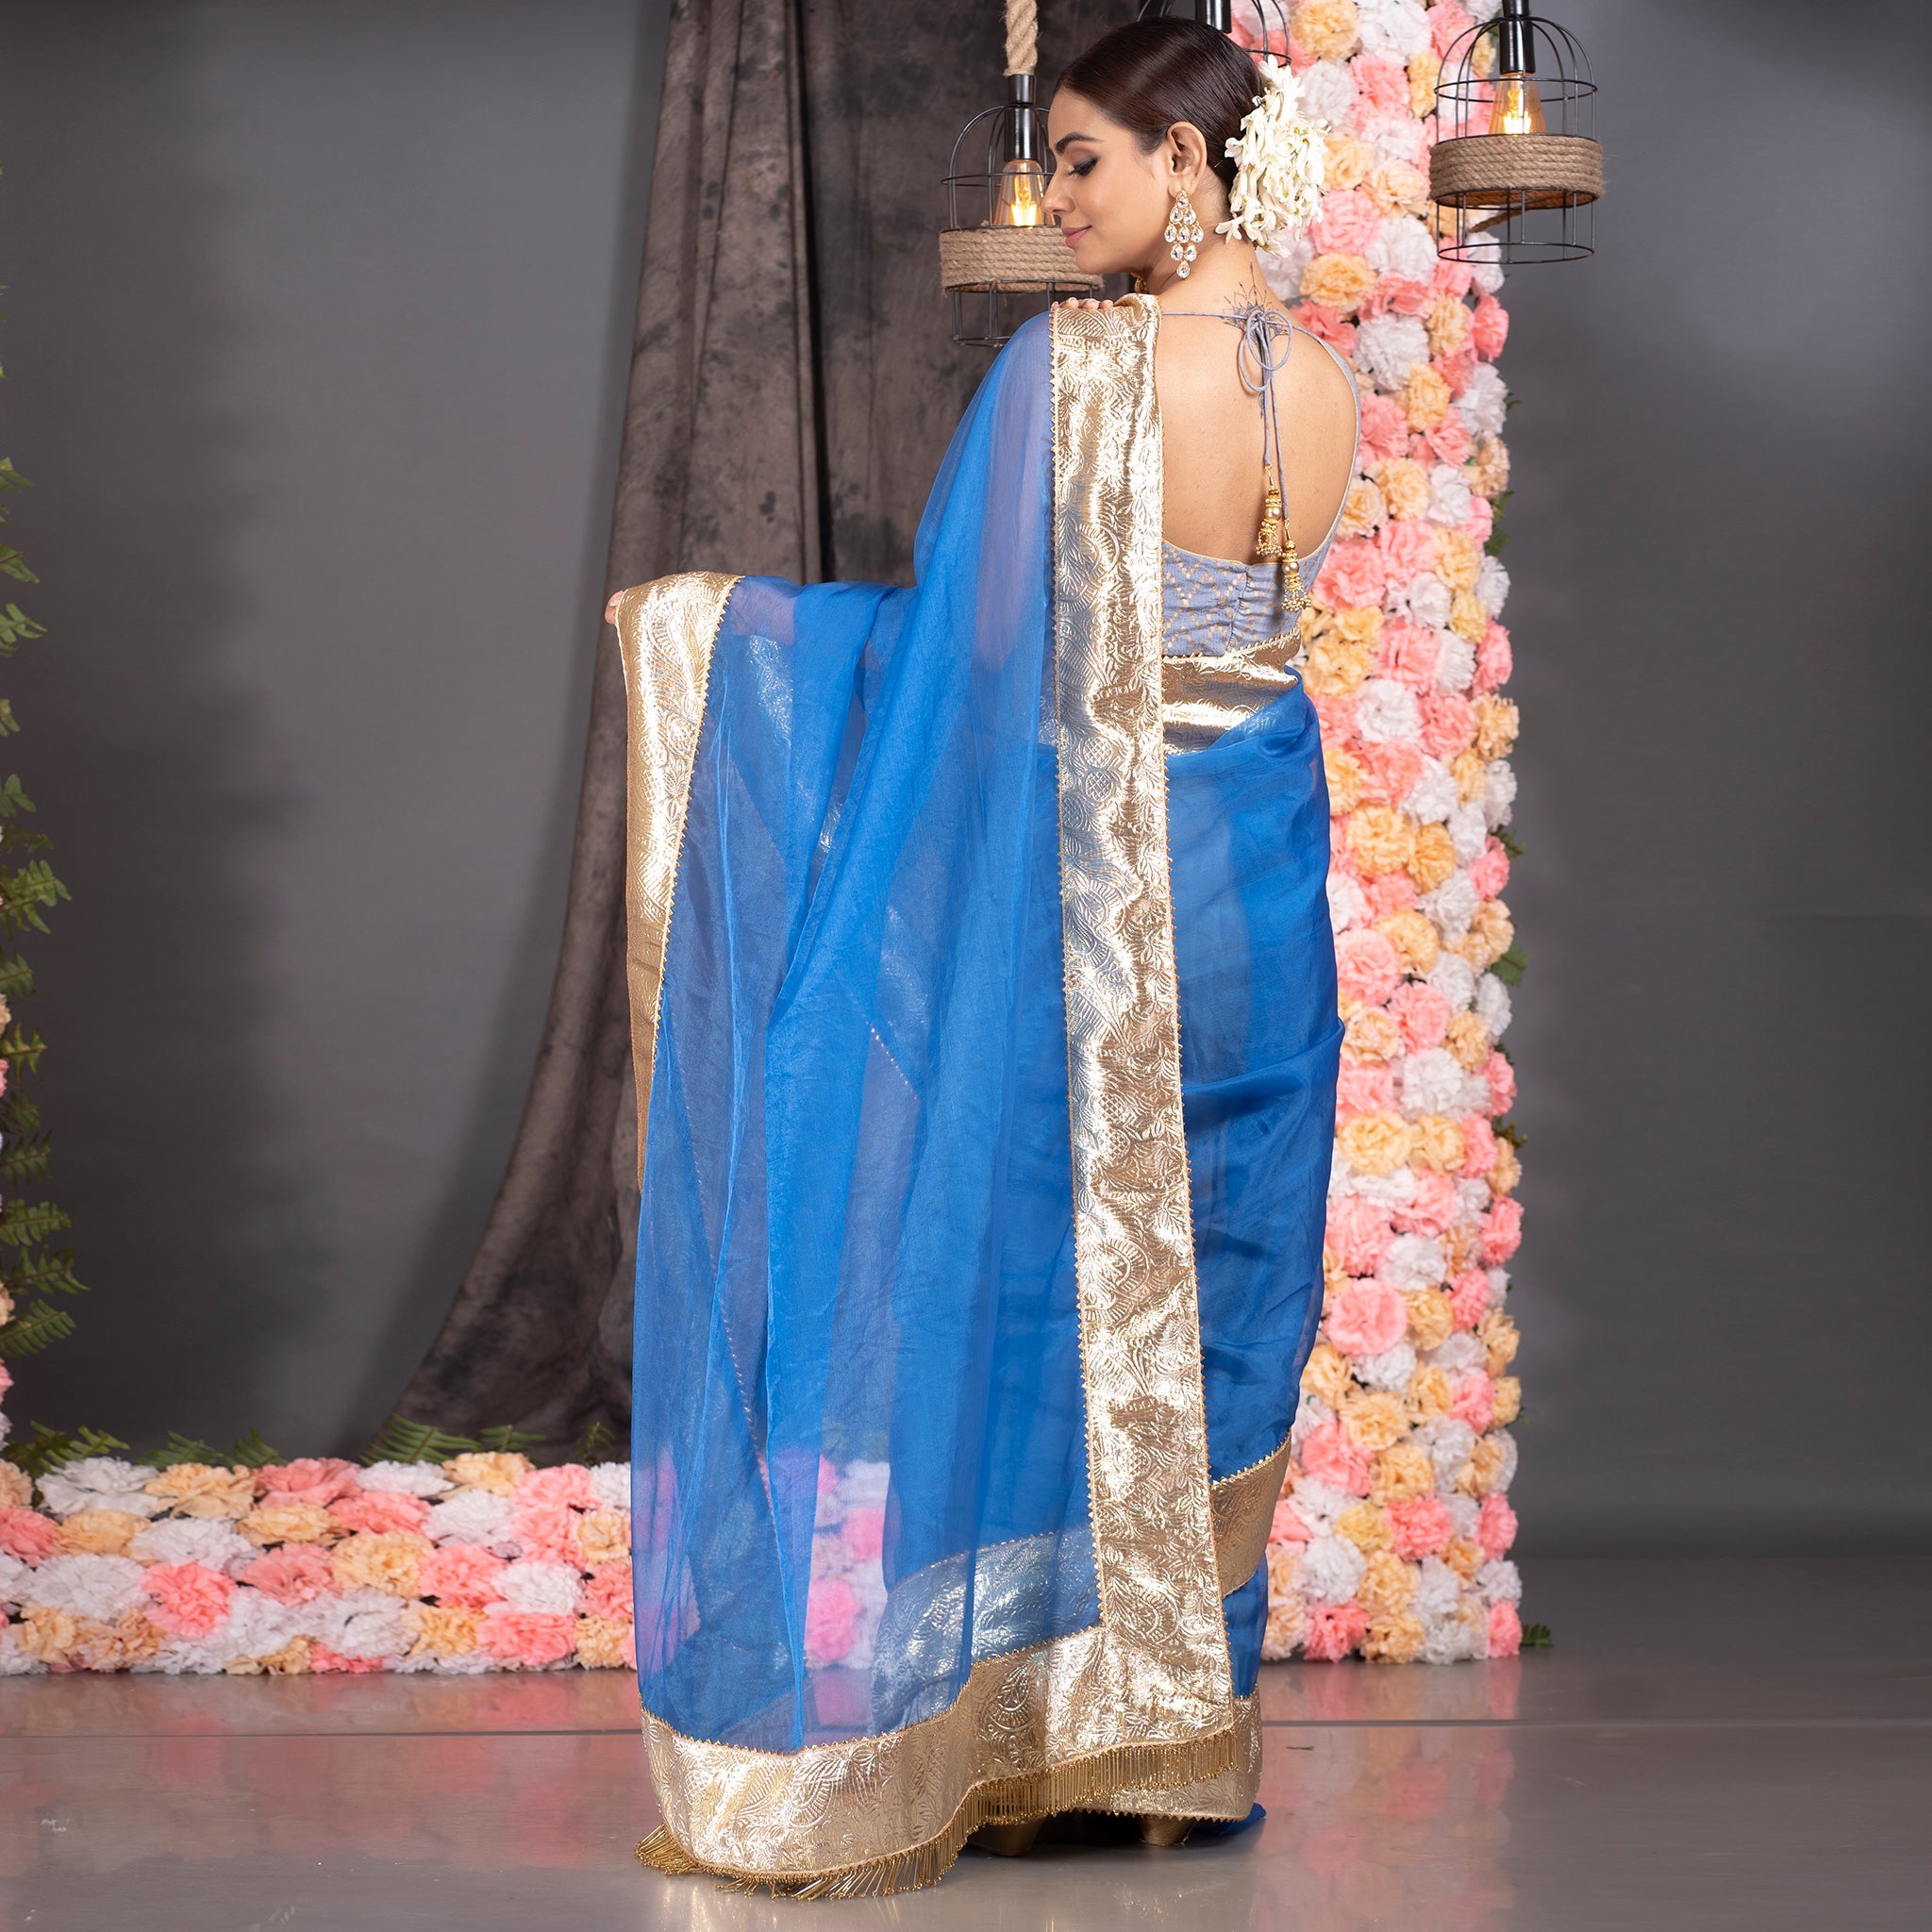 Women's Royal Blue Organza Saree With Gold Gota Border And Fringe Lace - Boveee